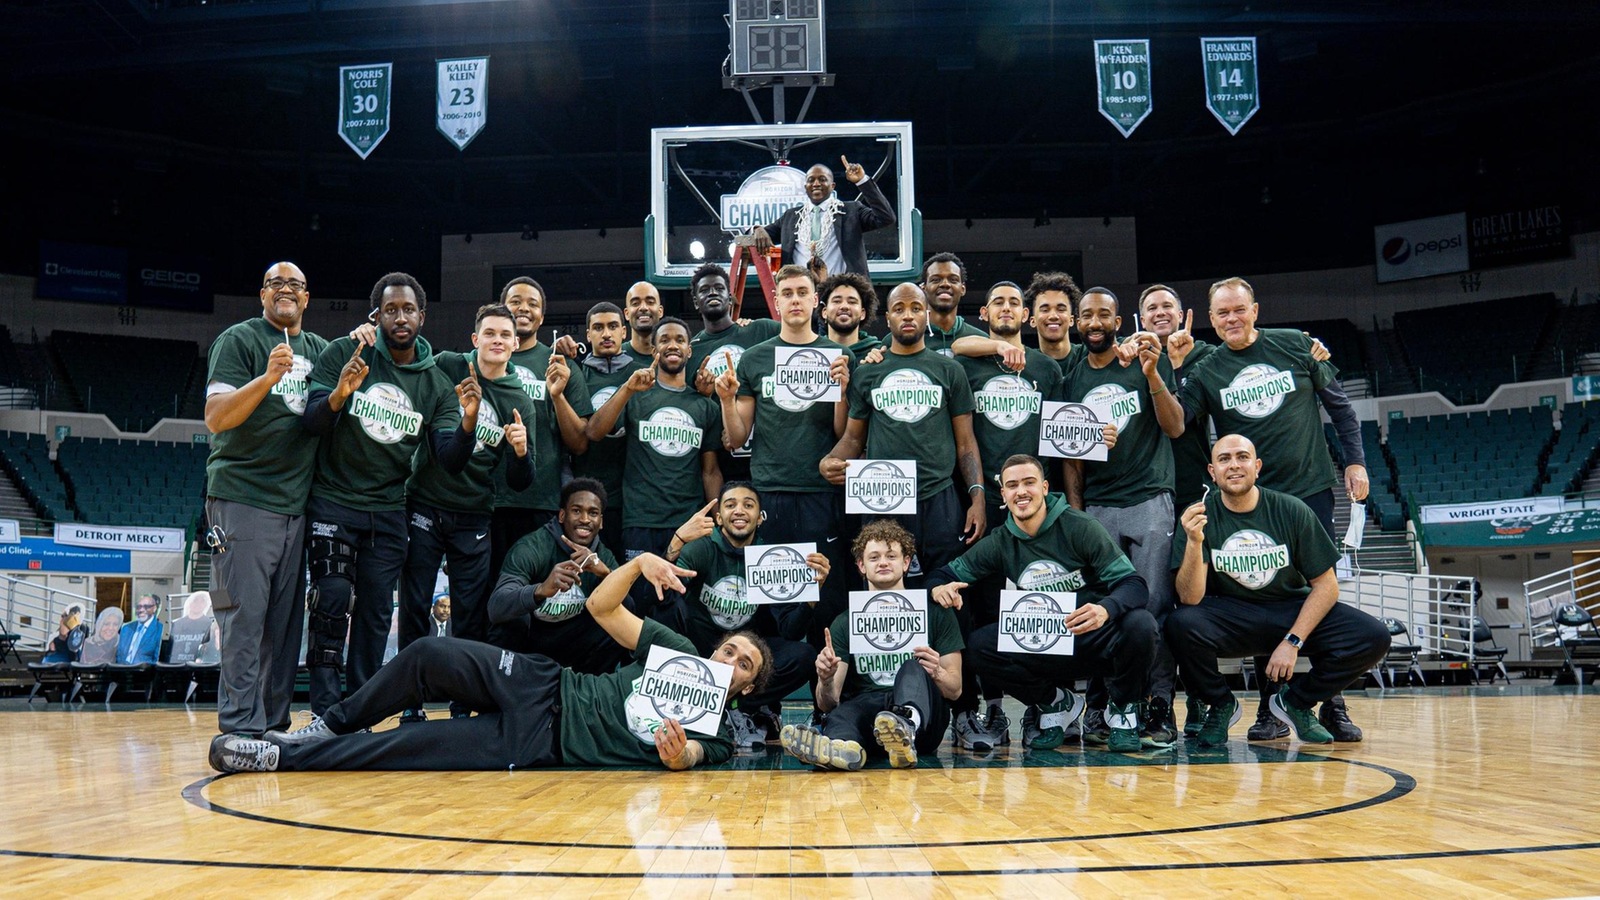 Cleveland State Snags No. 1 Seed in 2021 #HLMBB Tournament